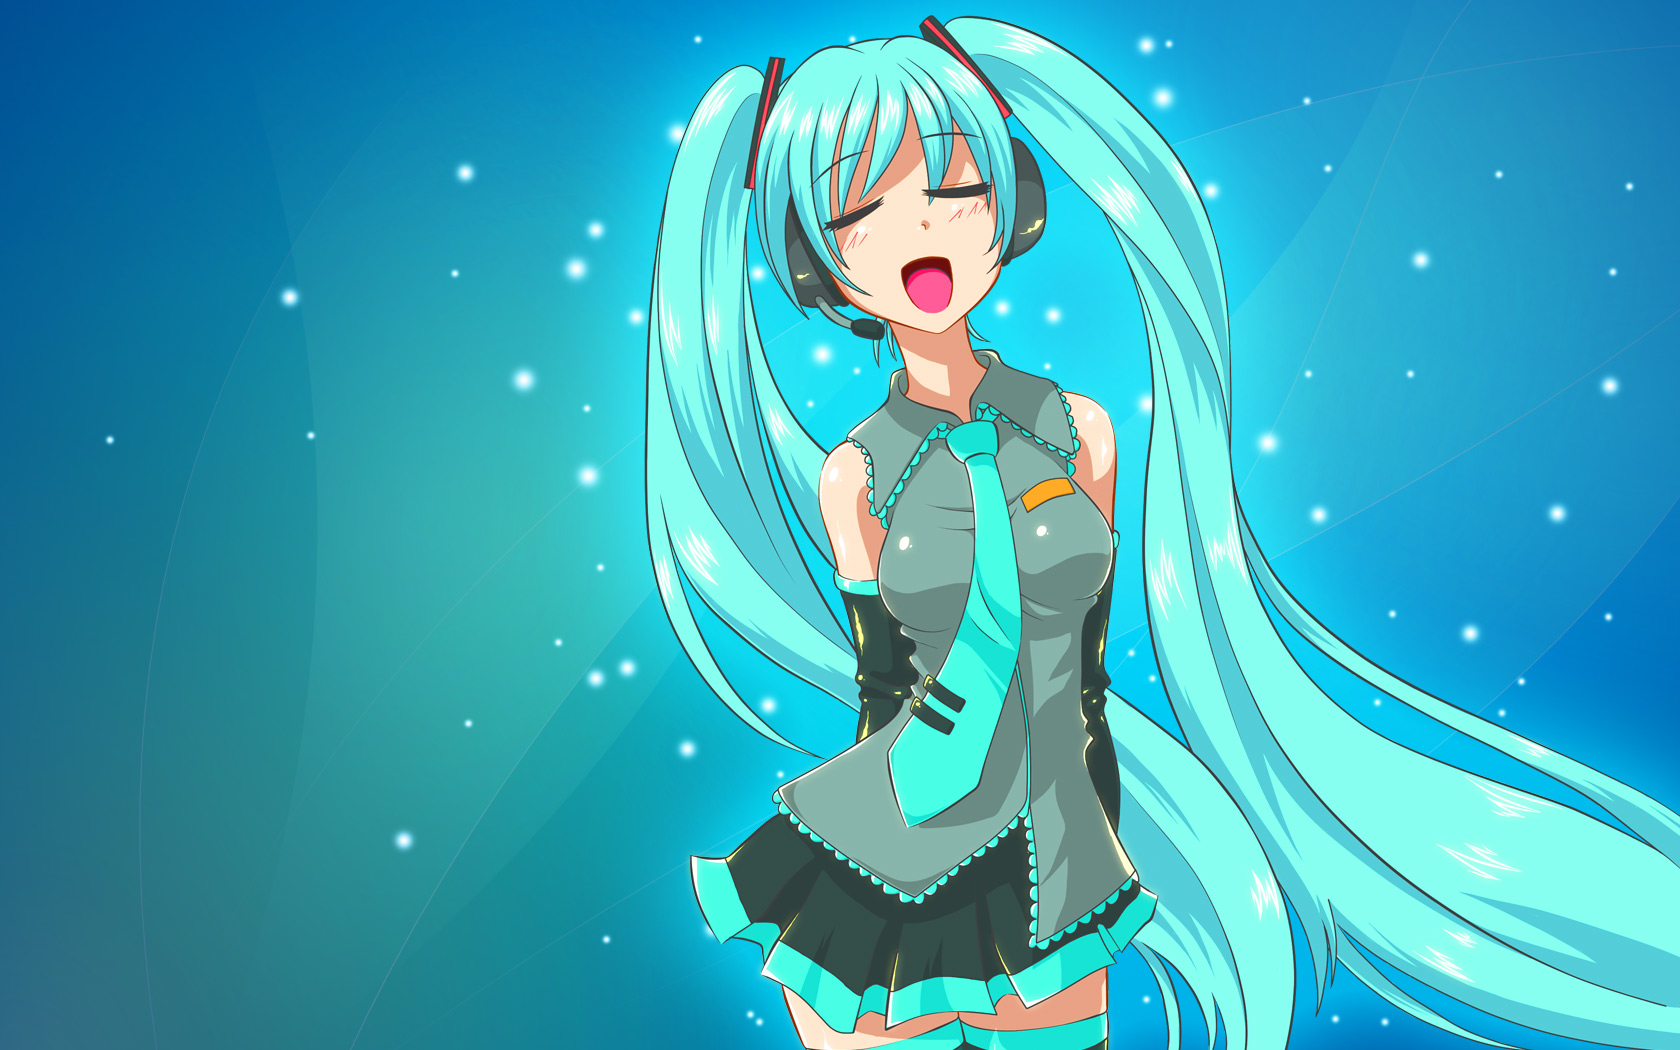  Vocaloid  Wallpaper  and Background Image 1680x1050 ID 84393